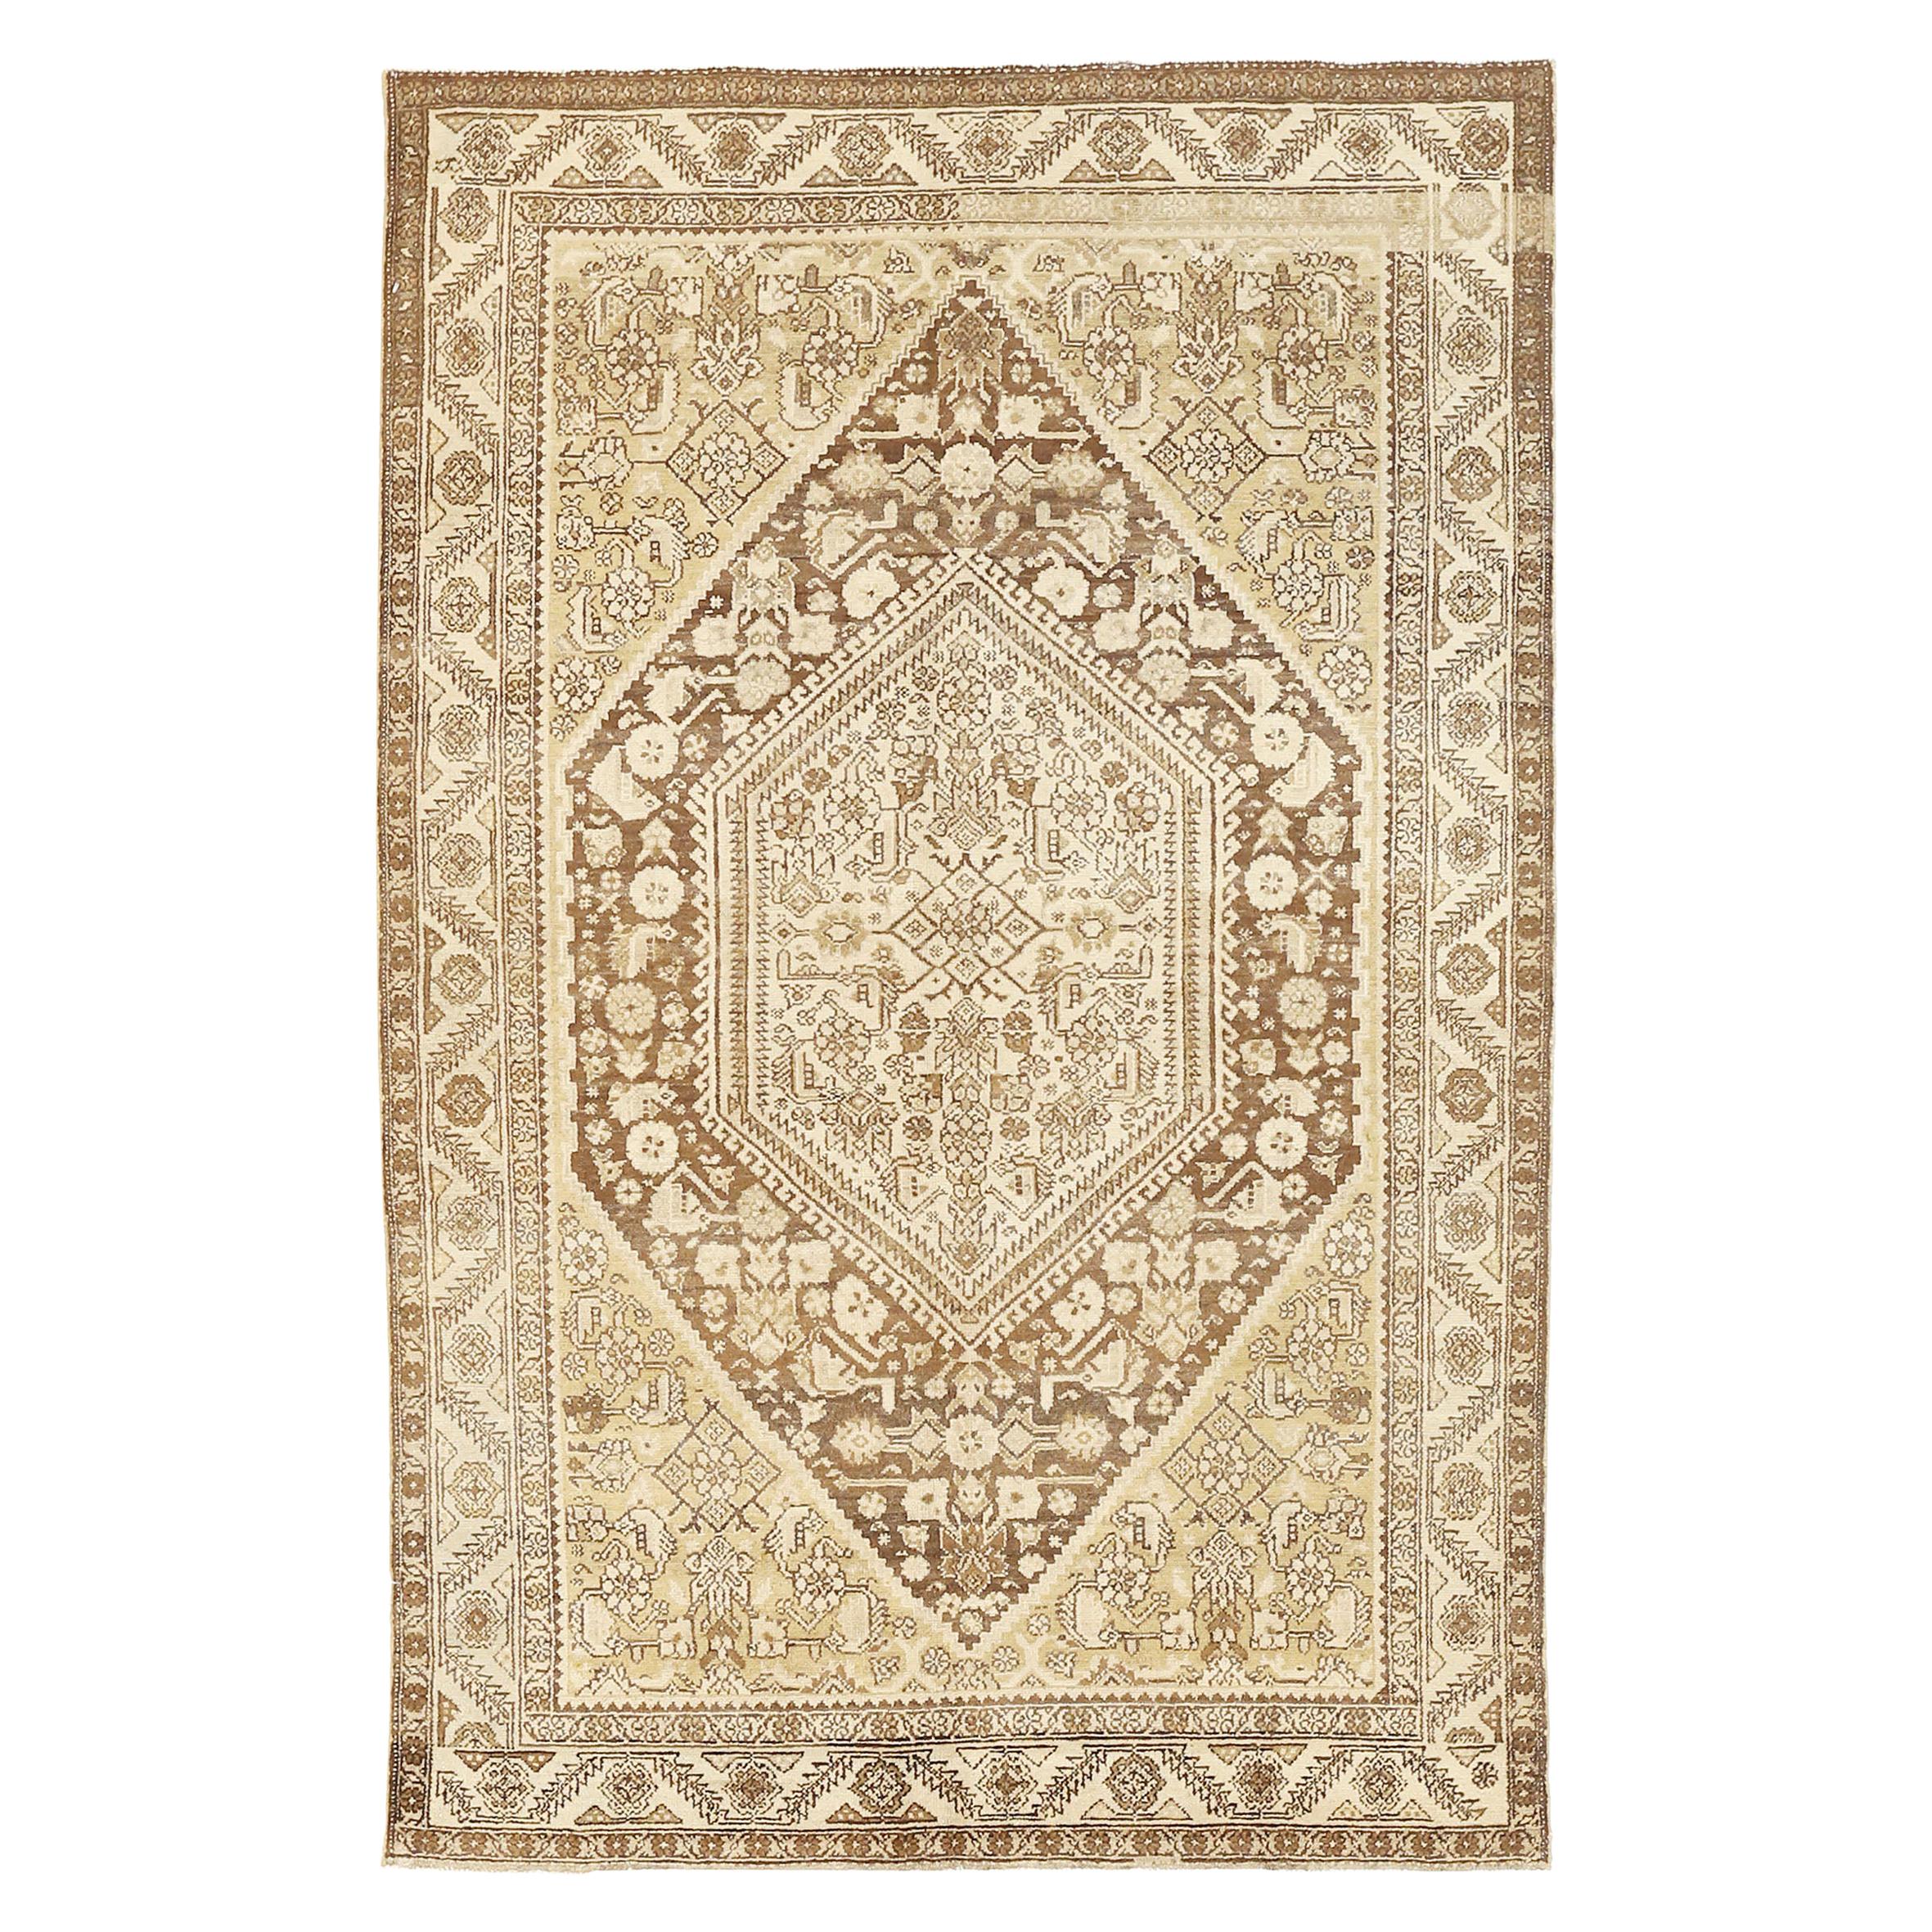 Antique Persian Gholtogh Rug with Brown Central Medallion on Ivory Field